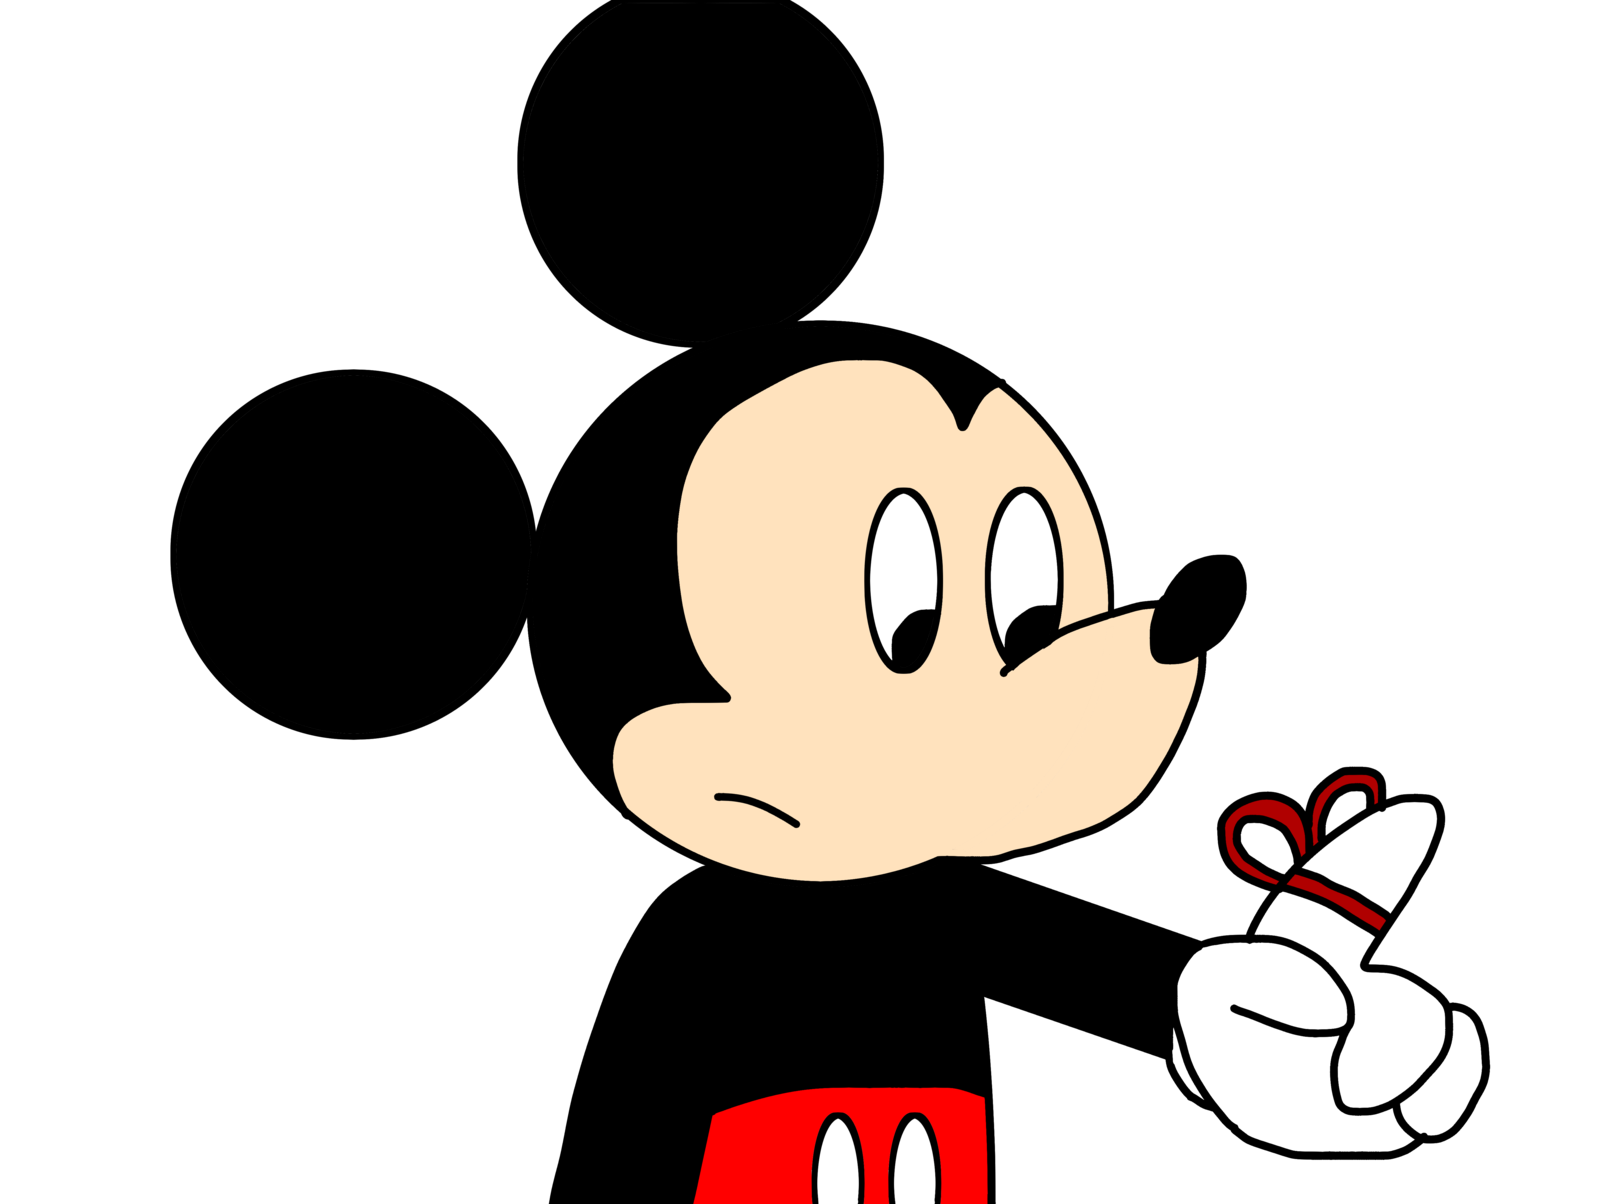 fingers clipart mickey mouse